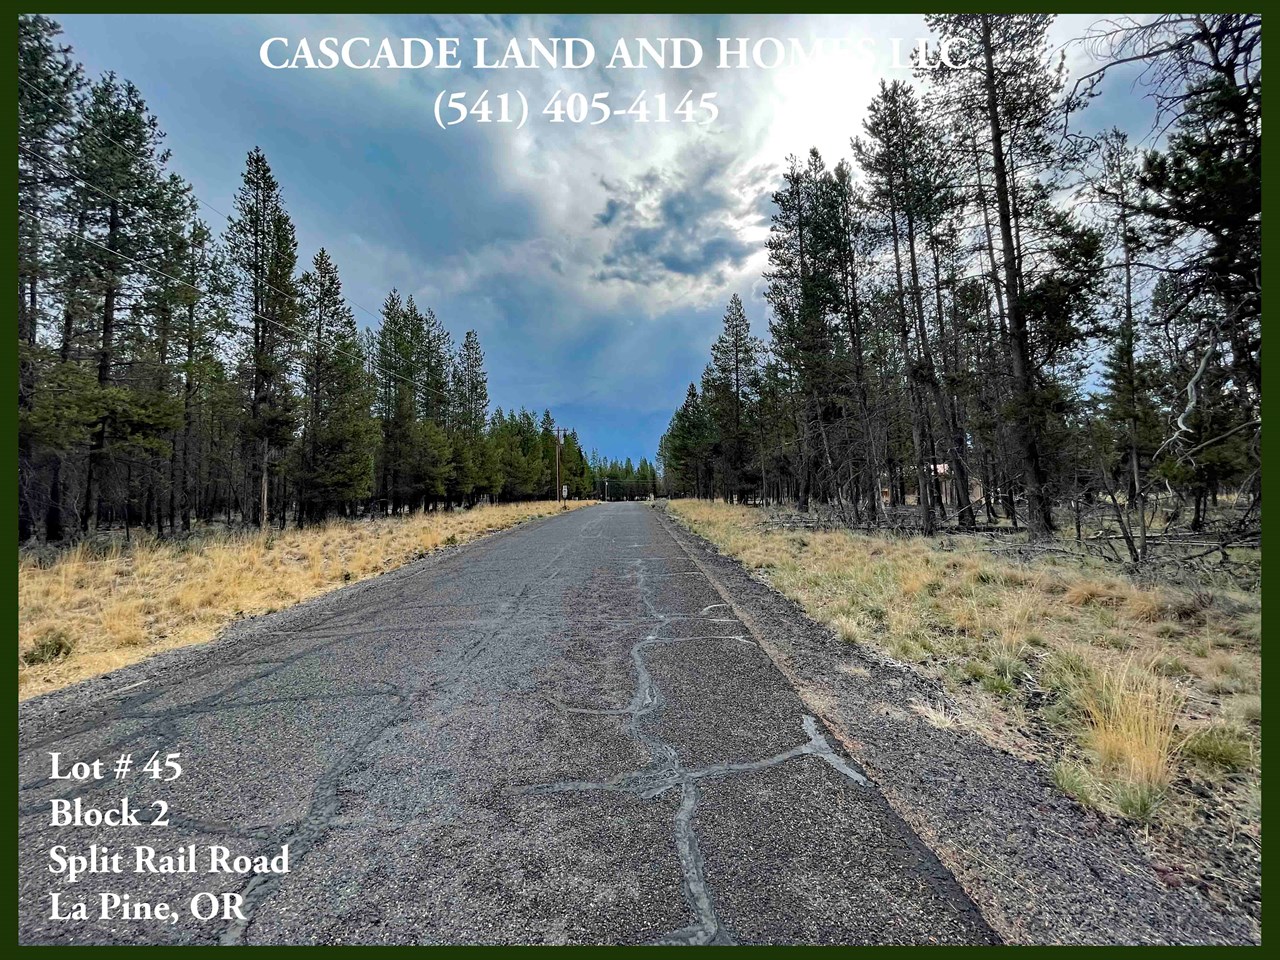 the roads within the subdivision are paved and maintained. it was very easy to access the property. you could easily bring your large rv or horse trailer into your new property with no trouble at all.